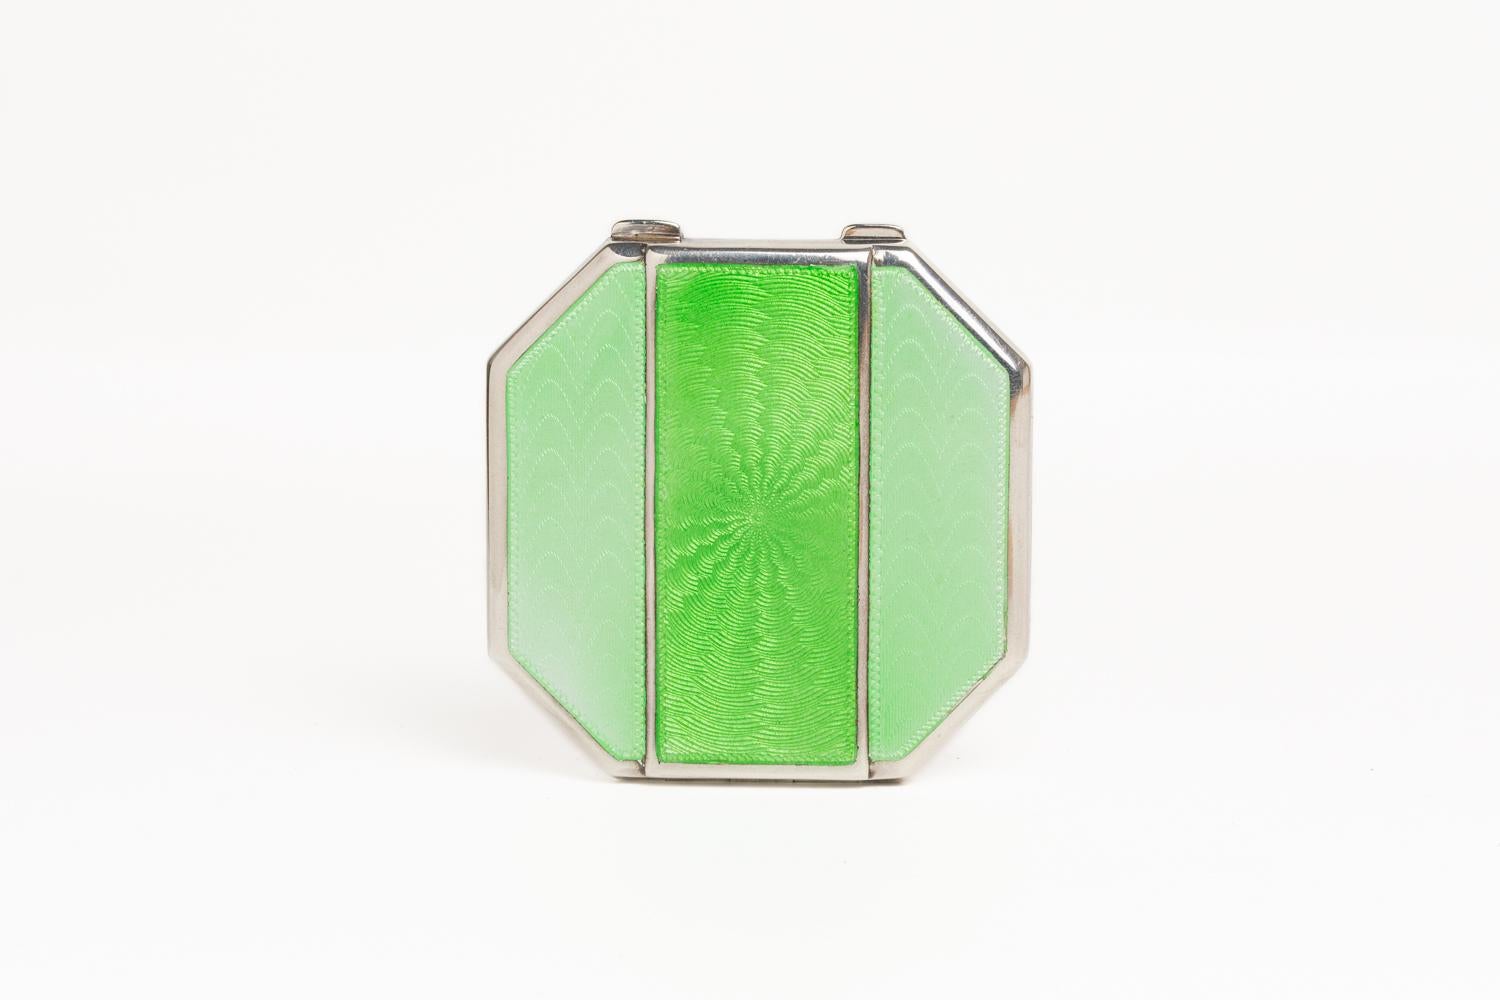 This fine and rare Art Deco green pale guilloche enamel compact was made in Birmingham 1934 and bears the marks of Mappin & Webb. This hexagonal form compact is decorated with a sunburst design, made in a beautiful pale green coloured enamel with a